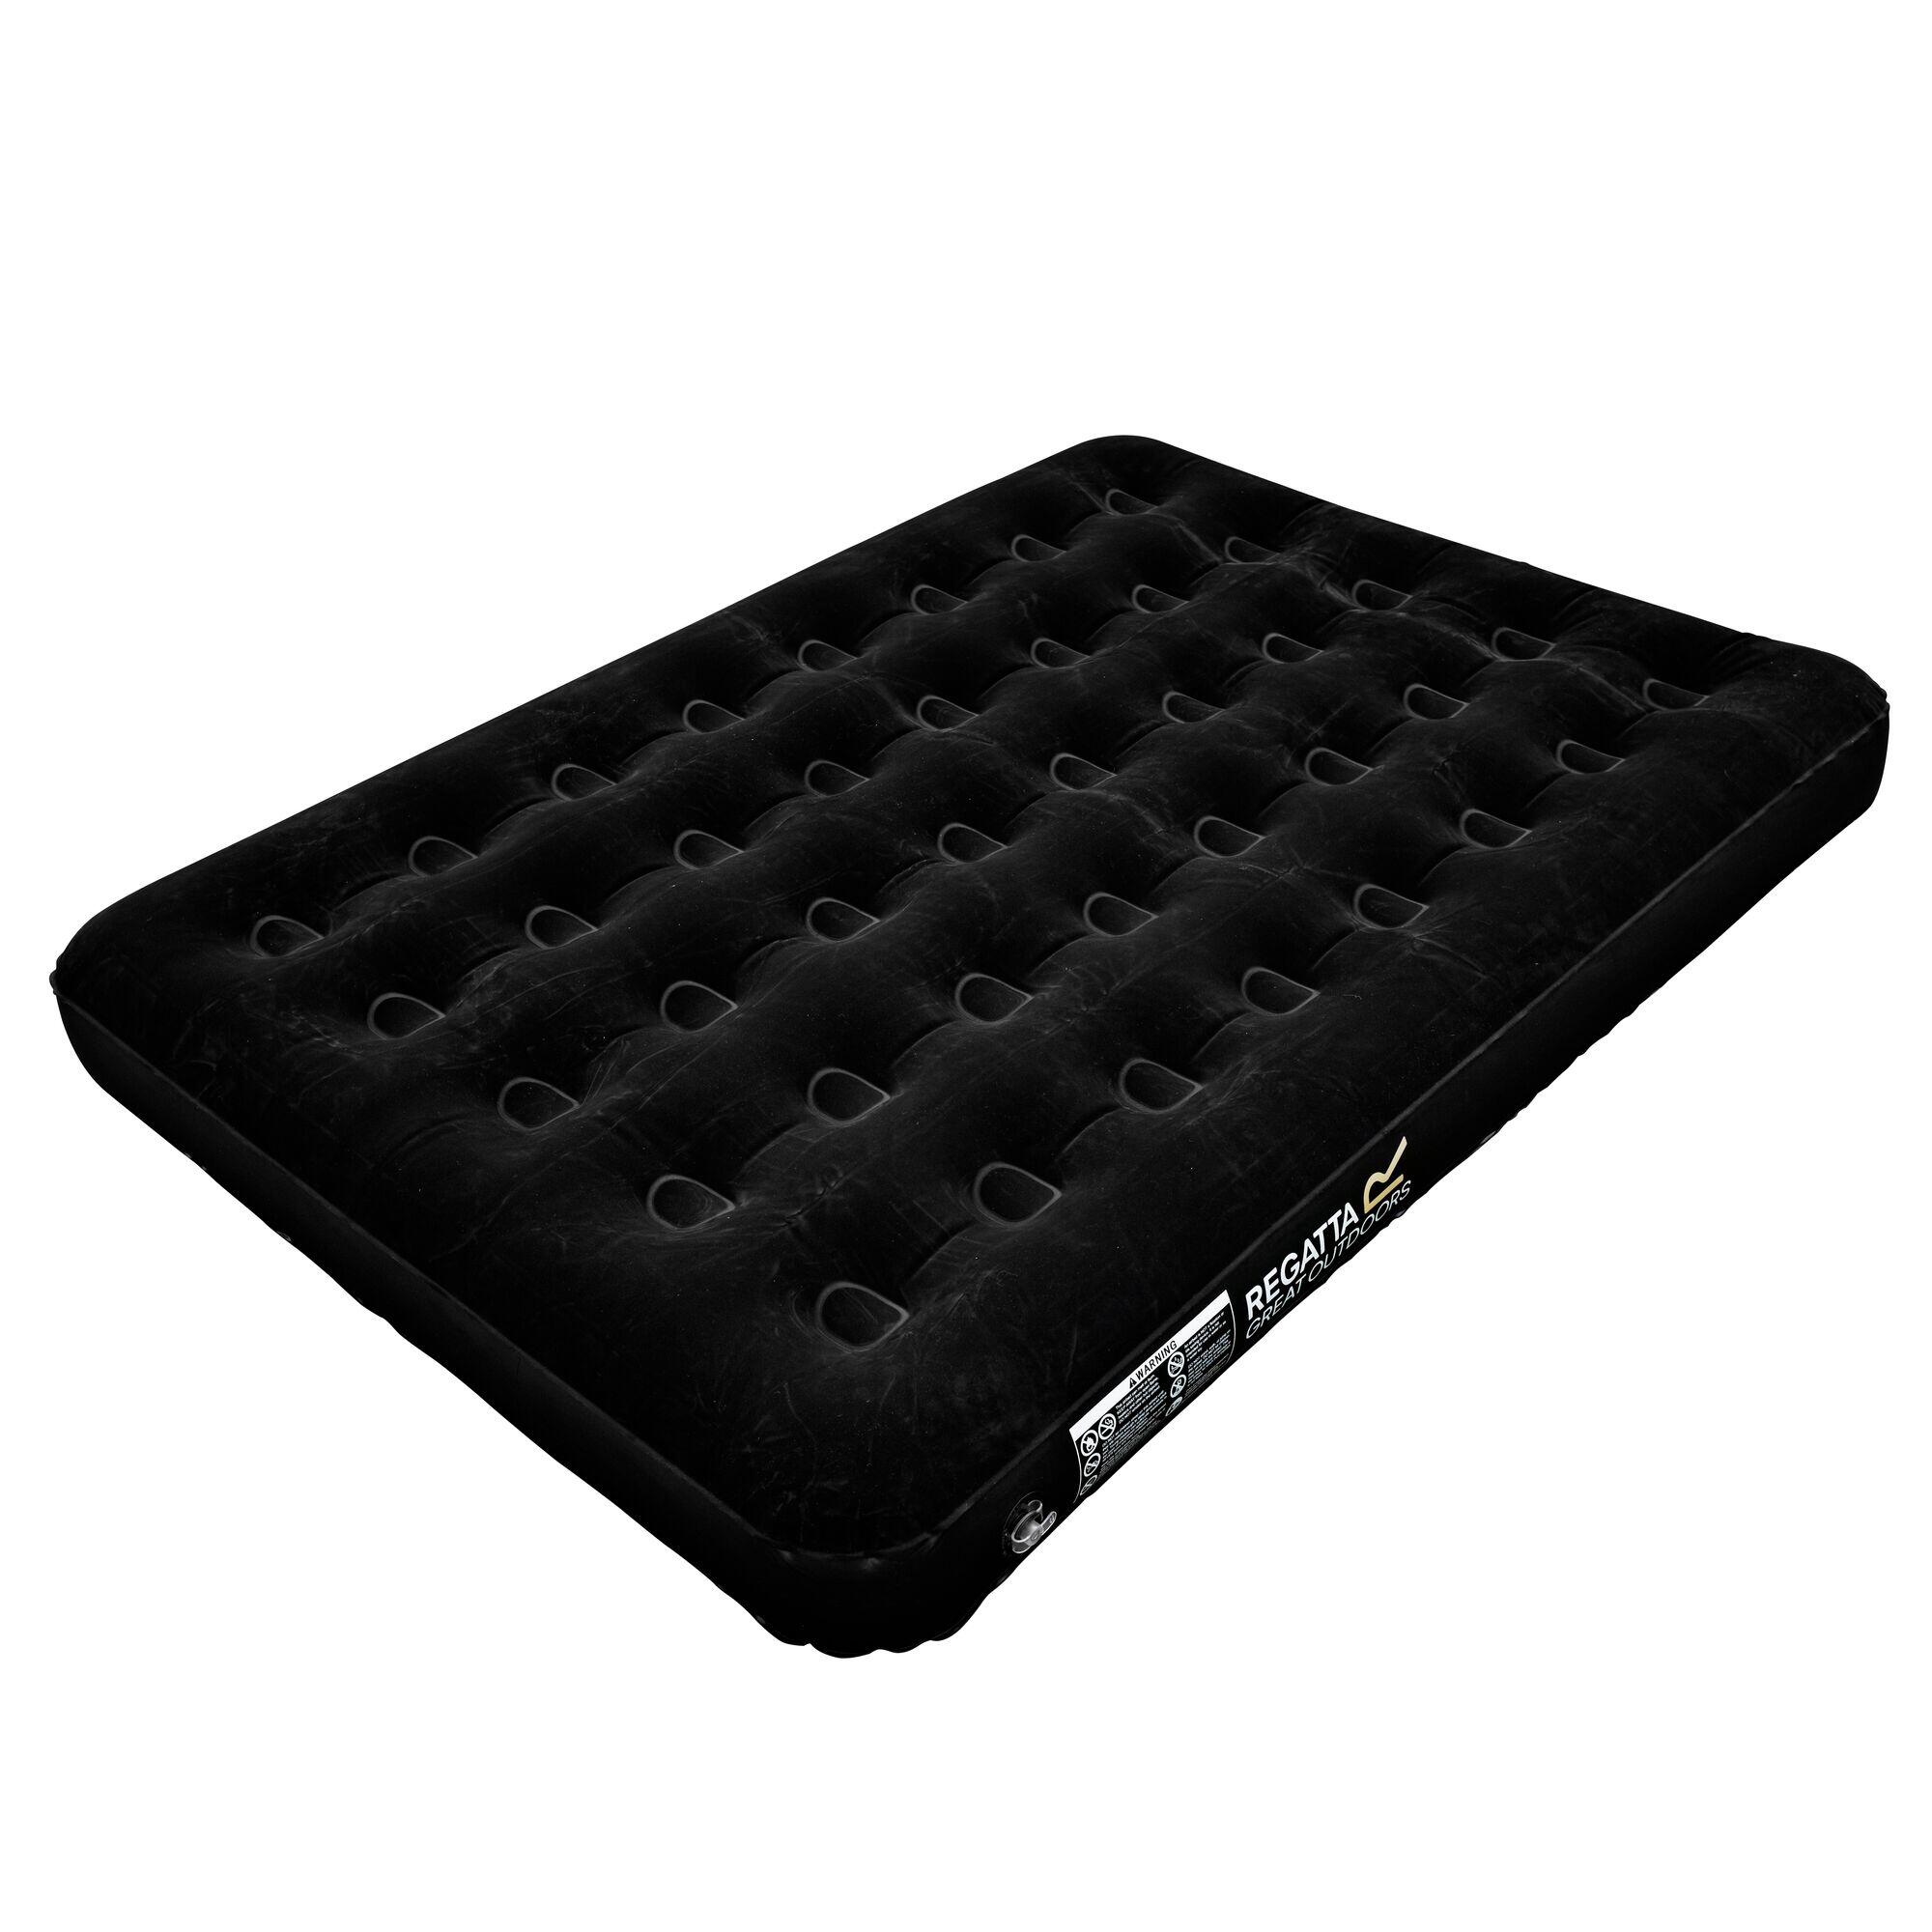 REGATTA Flock Adults' Camping Double Airbed - Black